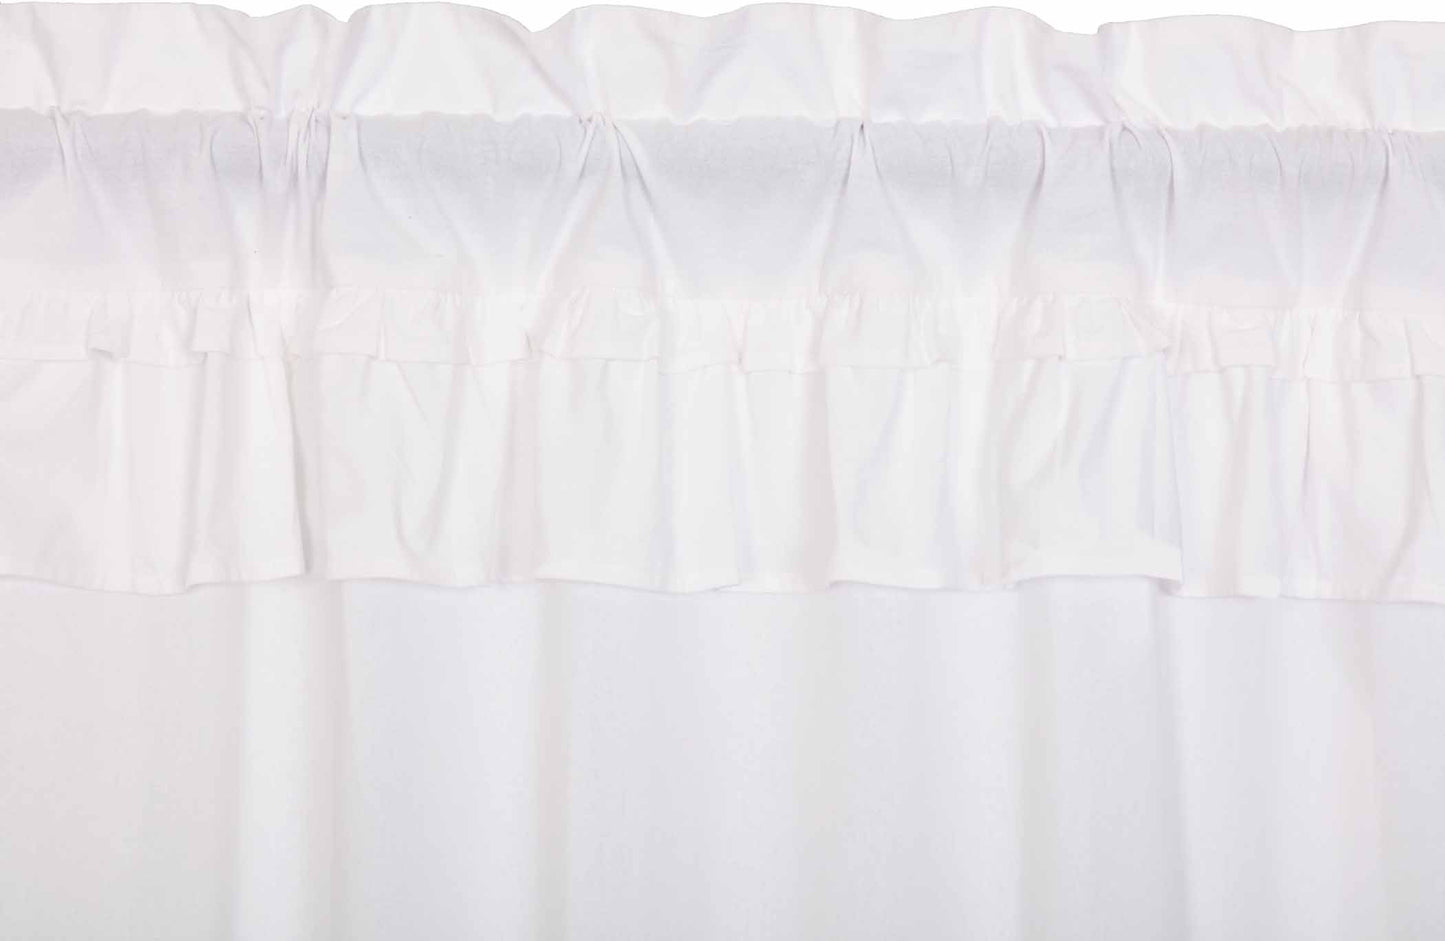 51993-Muslin-Ruffled-Bleached-White-Tier-Set-of-2-L24xW36-image-7